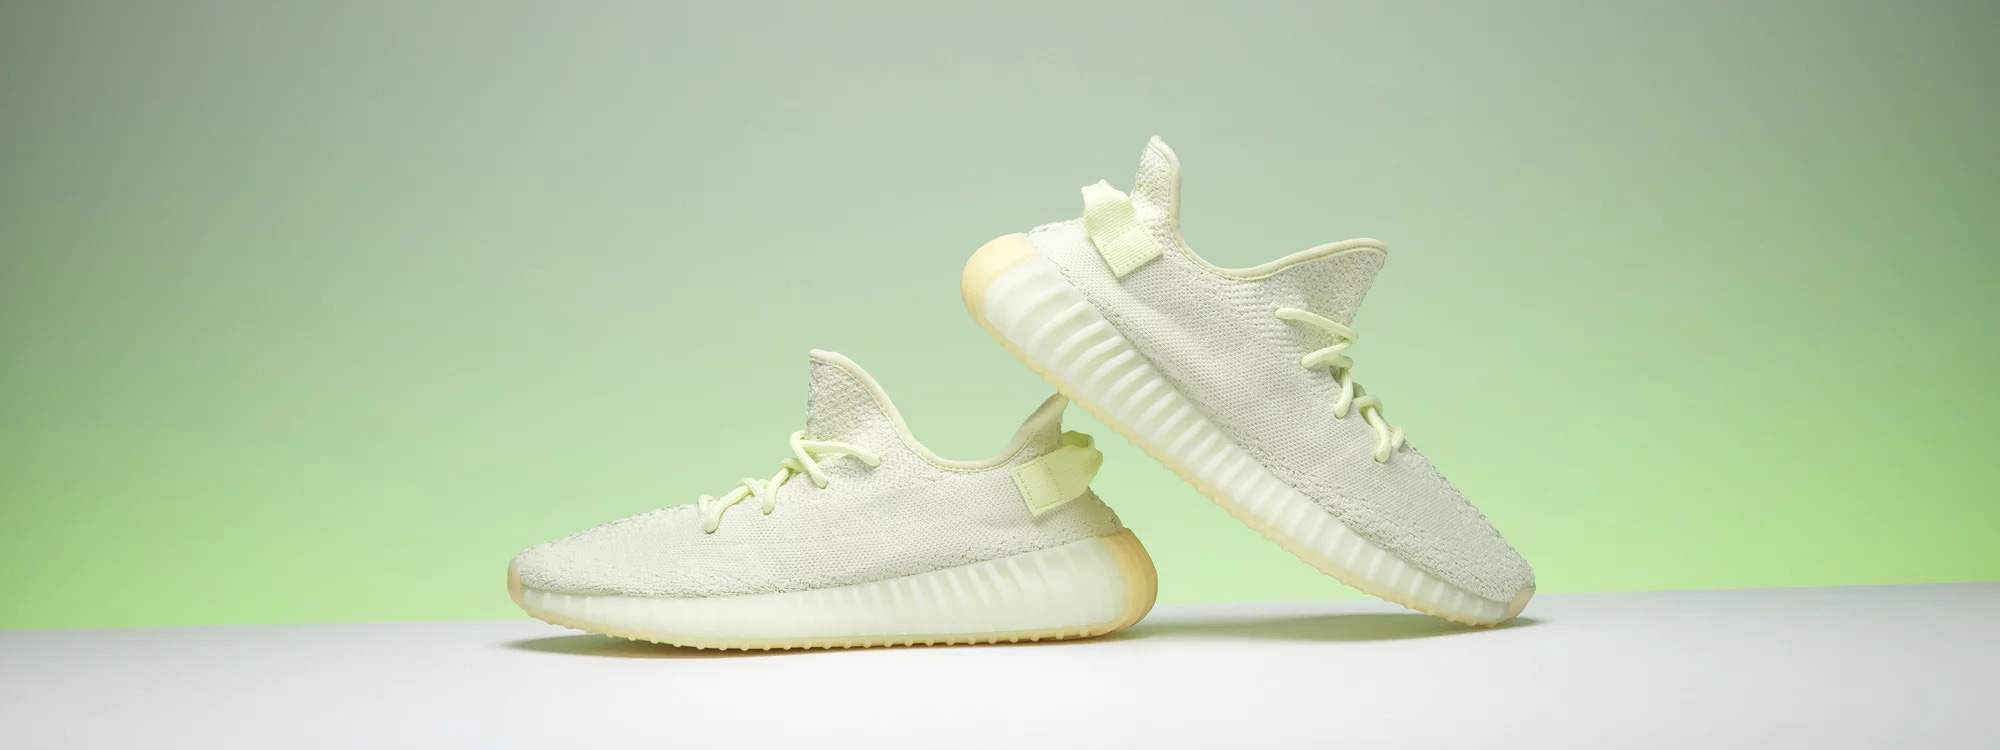 How to get Your size Adidas Yeezy Boost 350 V2 Butter shoes